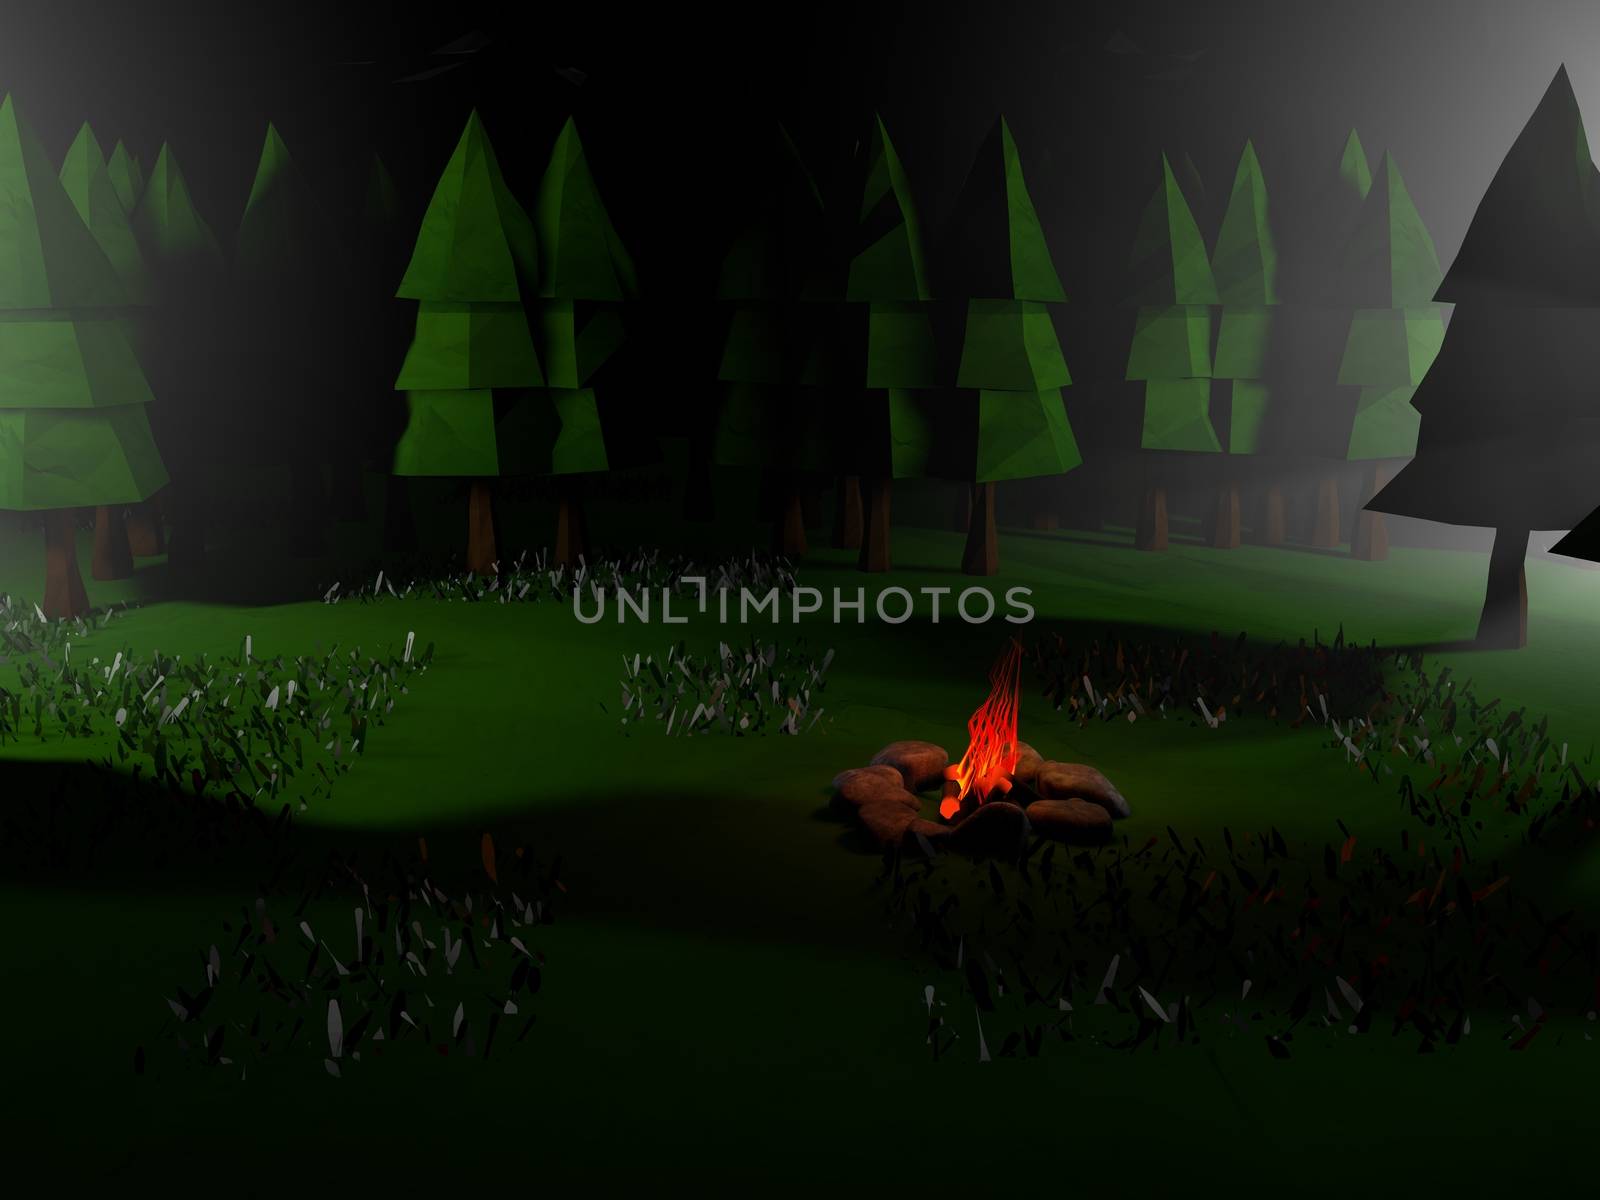 Low poly 3D night landscape scene by fares139